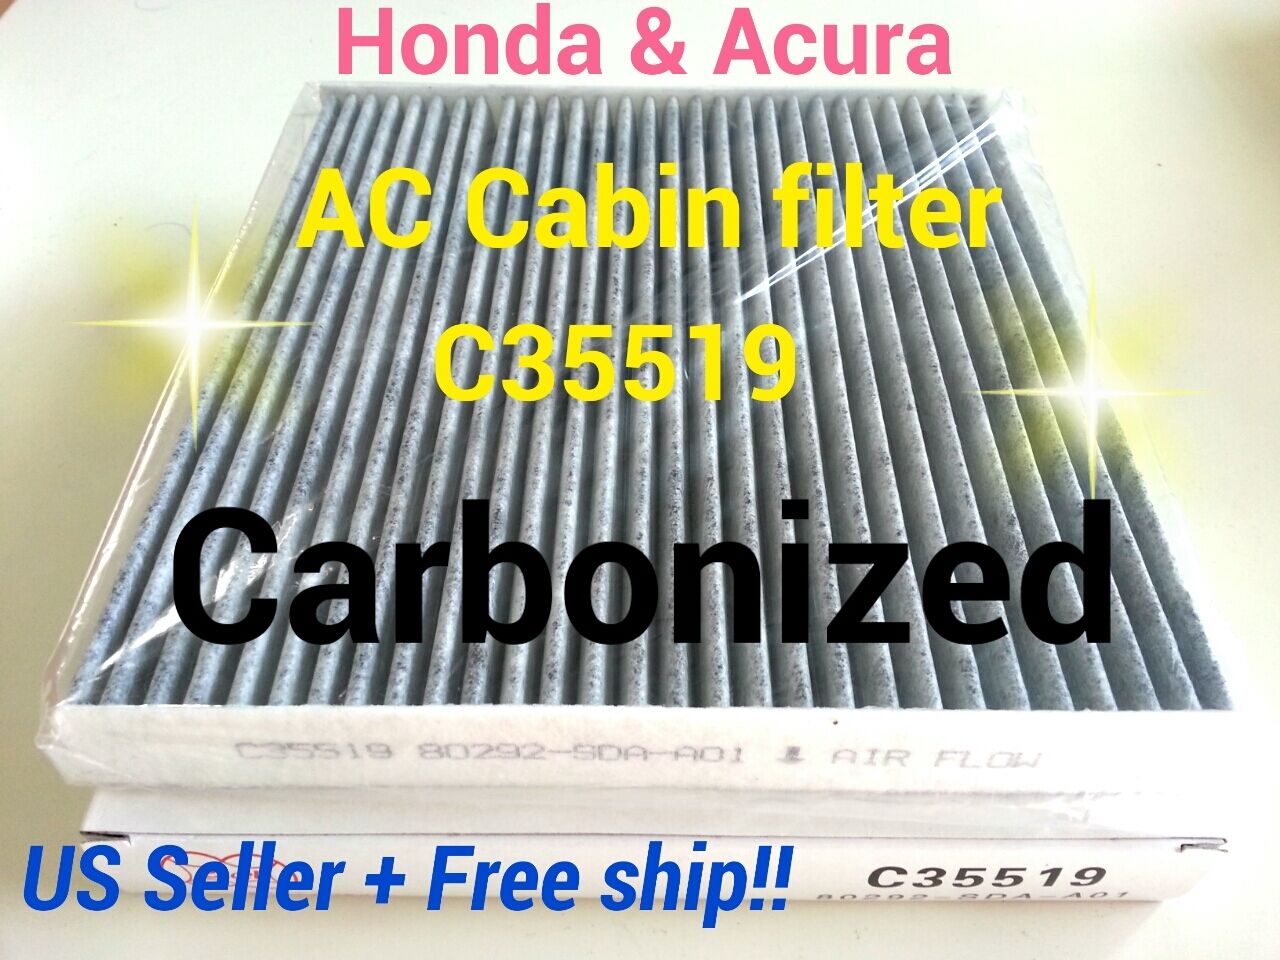 CARBONIZED C35519 For HONDA ACURA CABIN AIR FILTER Accord Civic CRV Odyssey...